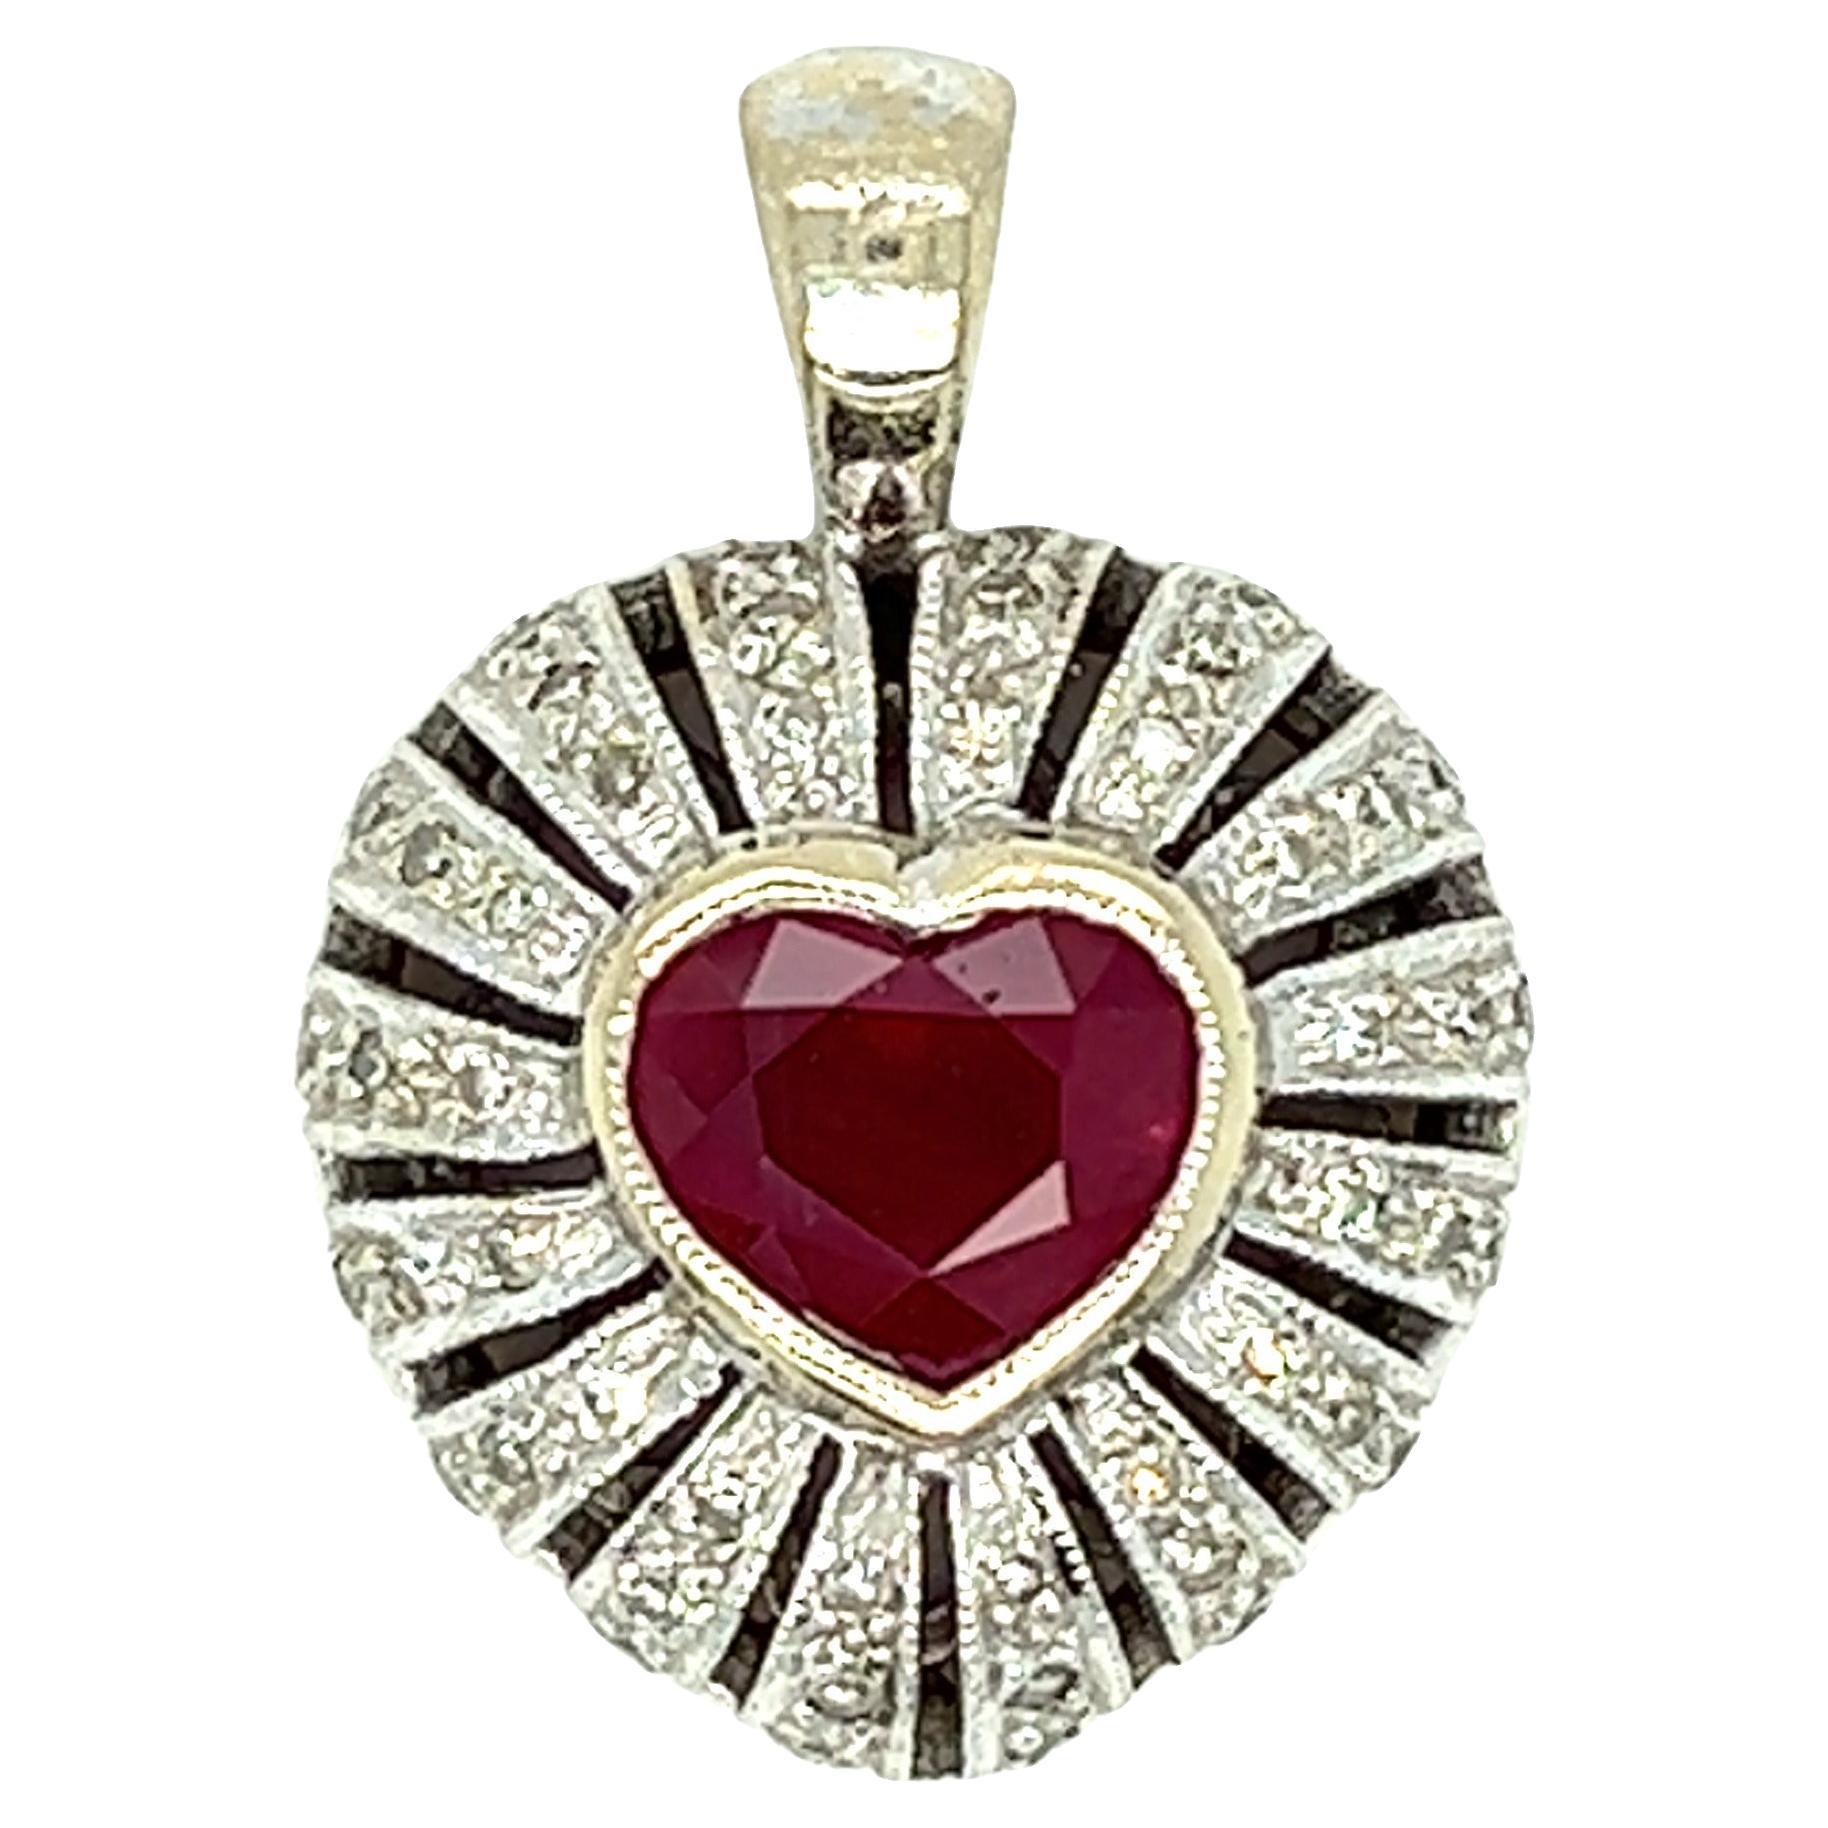 This beautiful vintage pendant showcases a 1.35 carat (approx.) heart shaped ruby at center. The ruby is surrounded by 64 round brilliant cut diamond weighing approximately 0.70 carat. The dome shape of the pendant adds dimension to the piece. It is